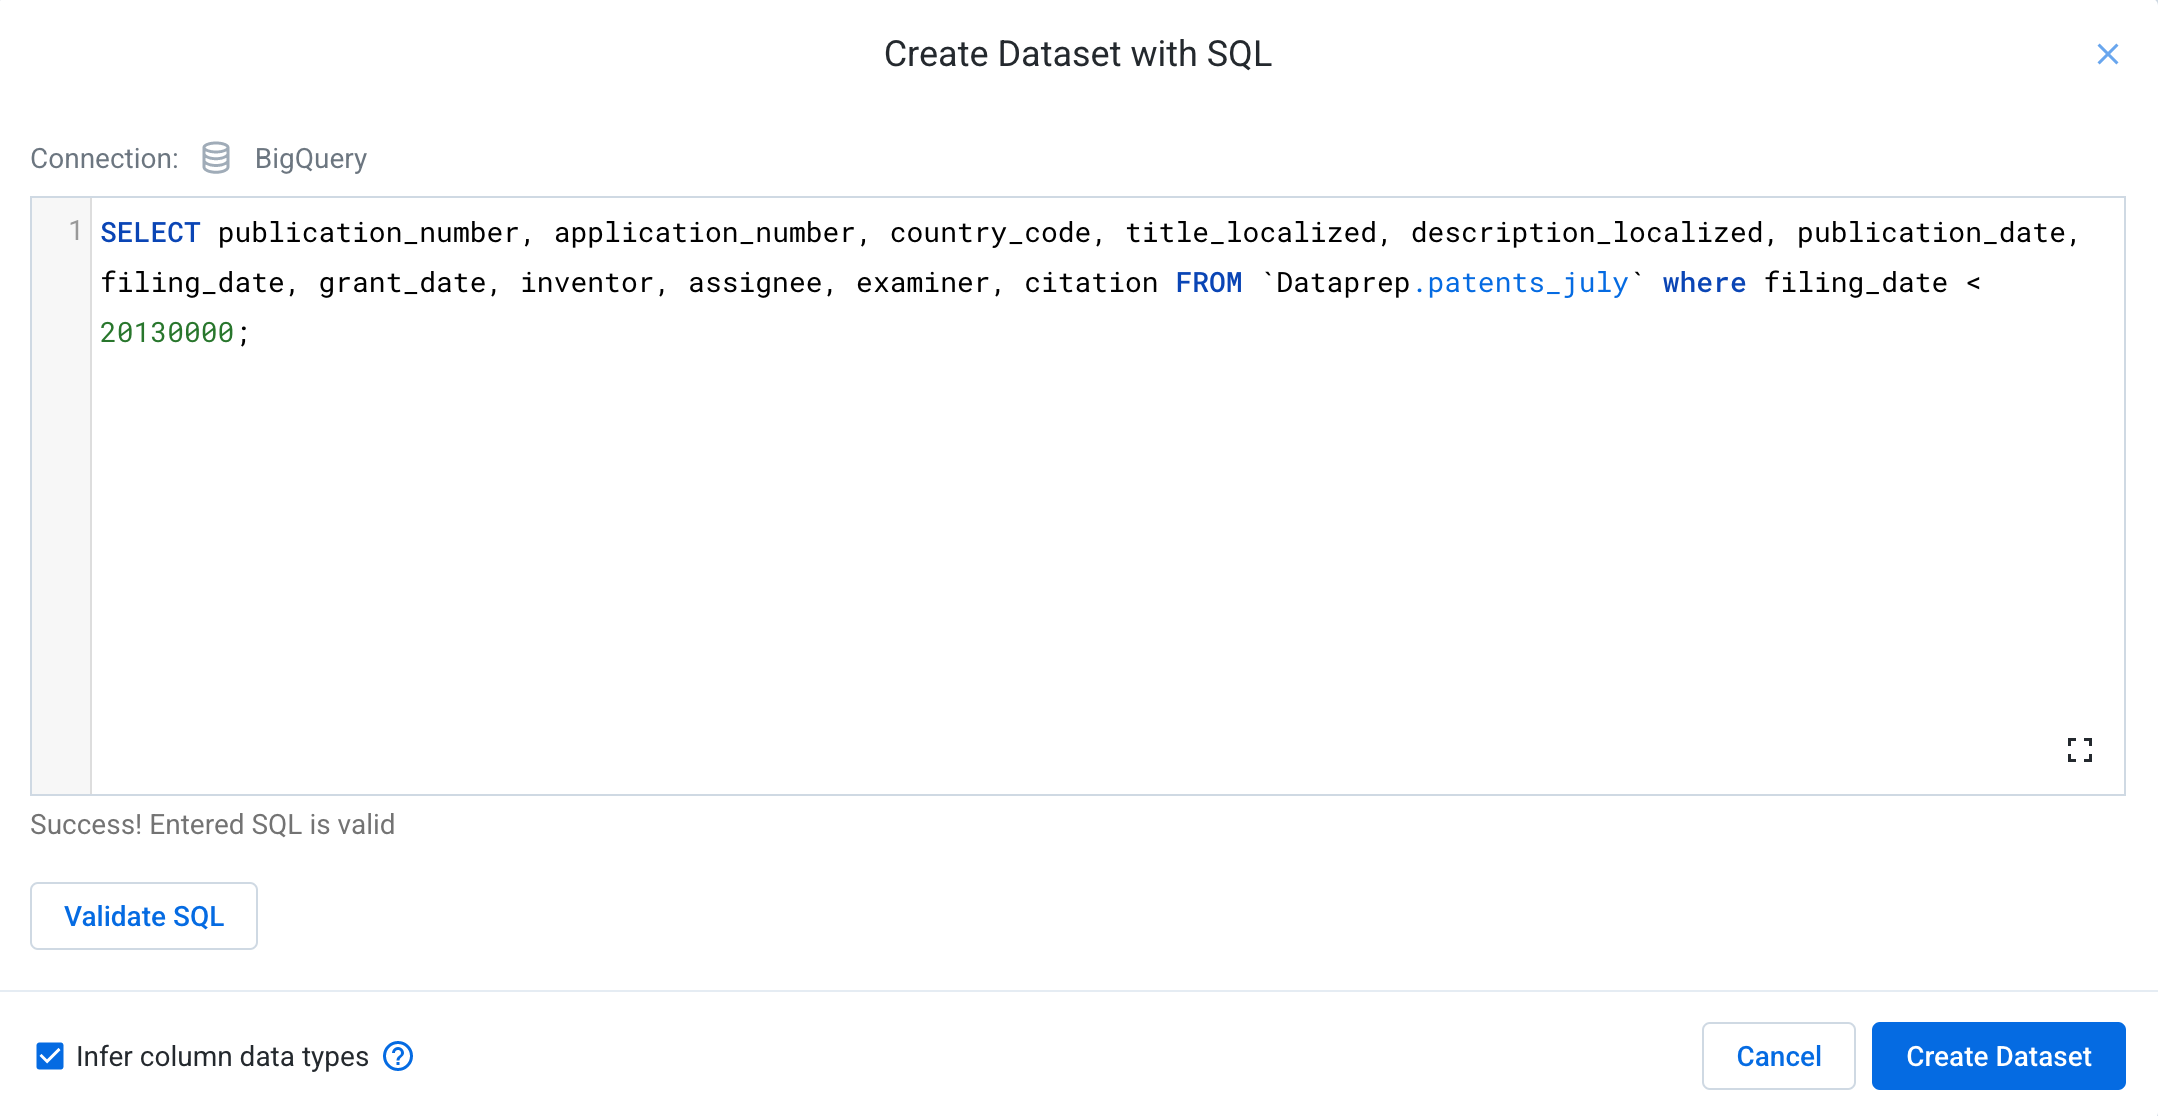 Create Dataset with SQL query dialog box displaying validated SQL statement